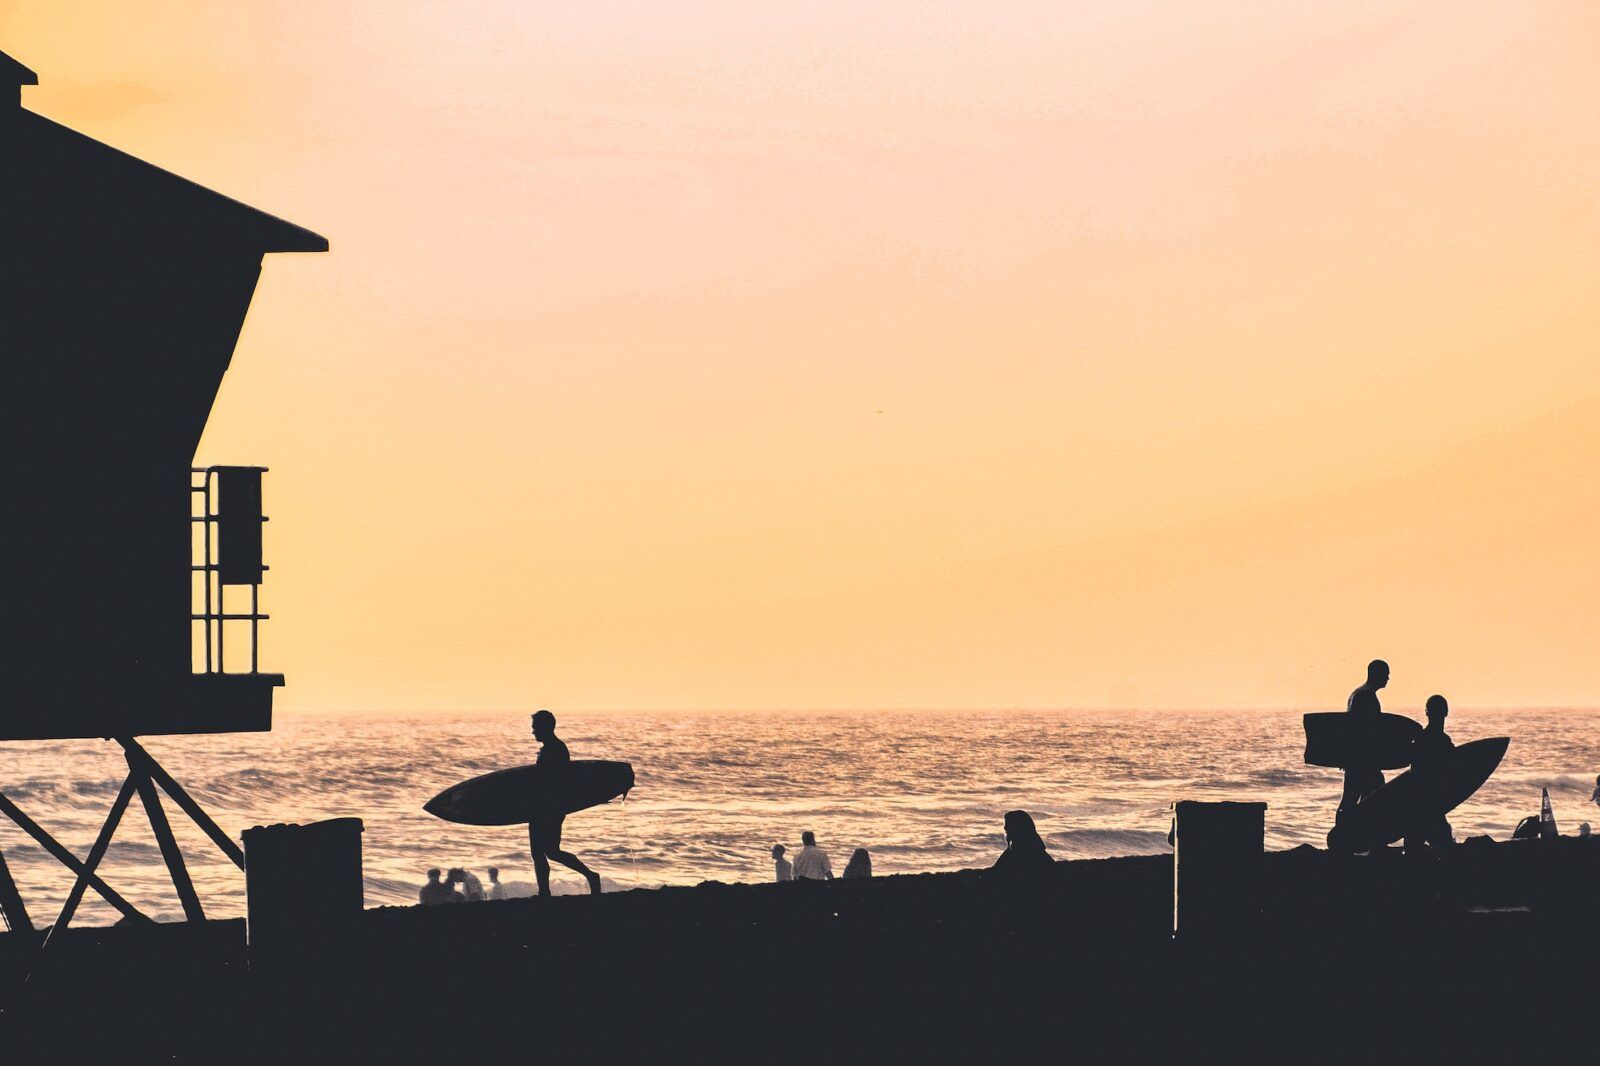 Silhouettes of surfers at the beach at sunset in Huntington Beach, California